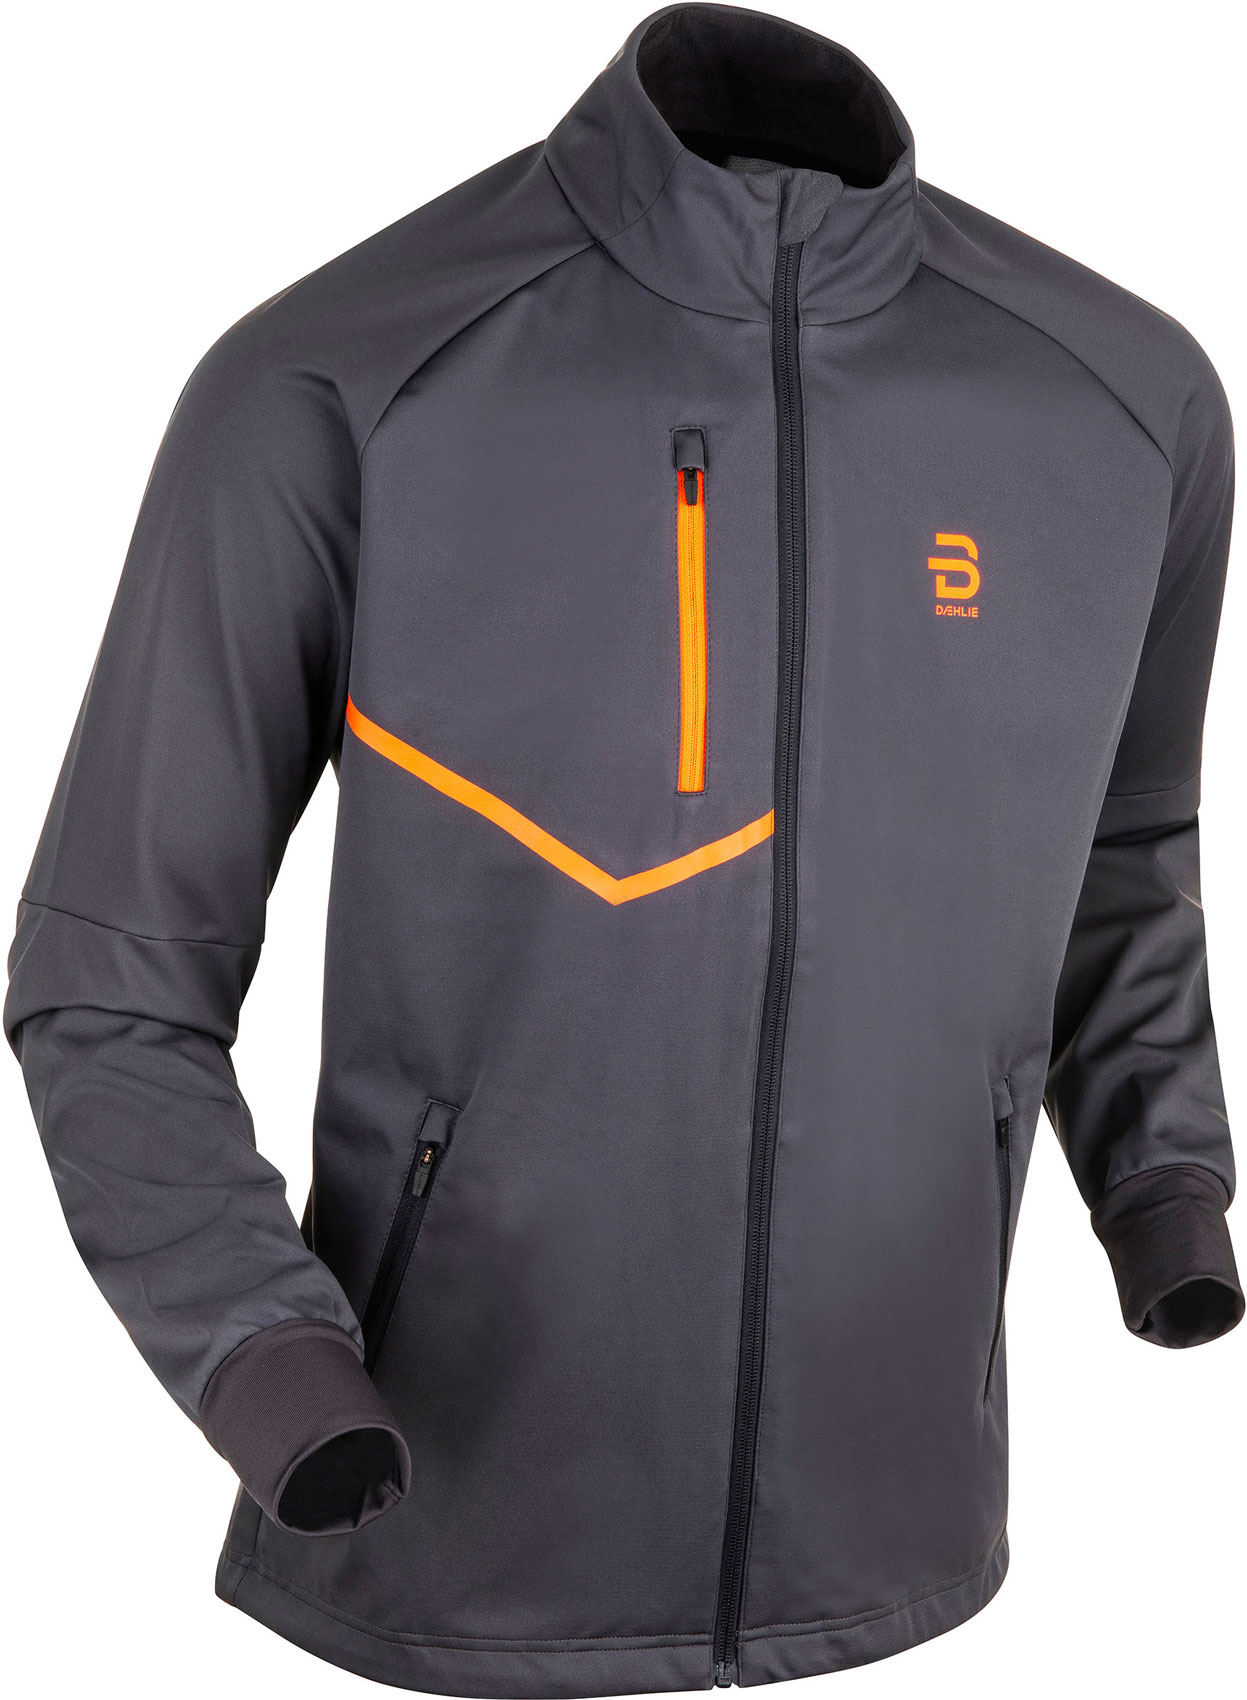 Jacket for cross-country skiing